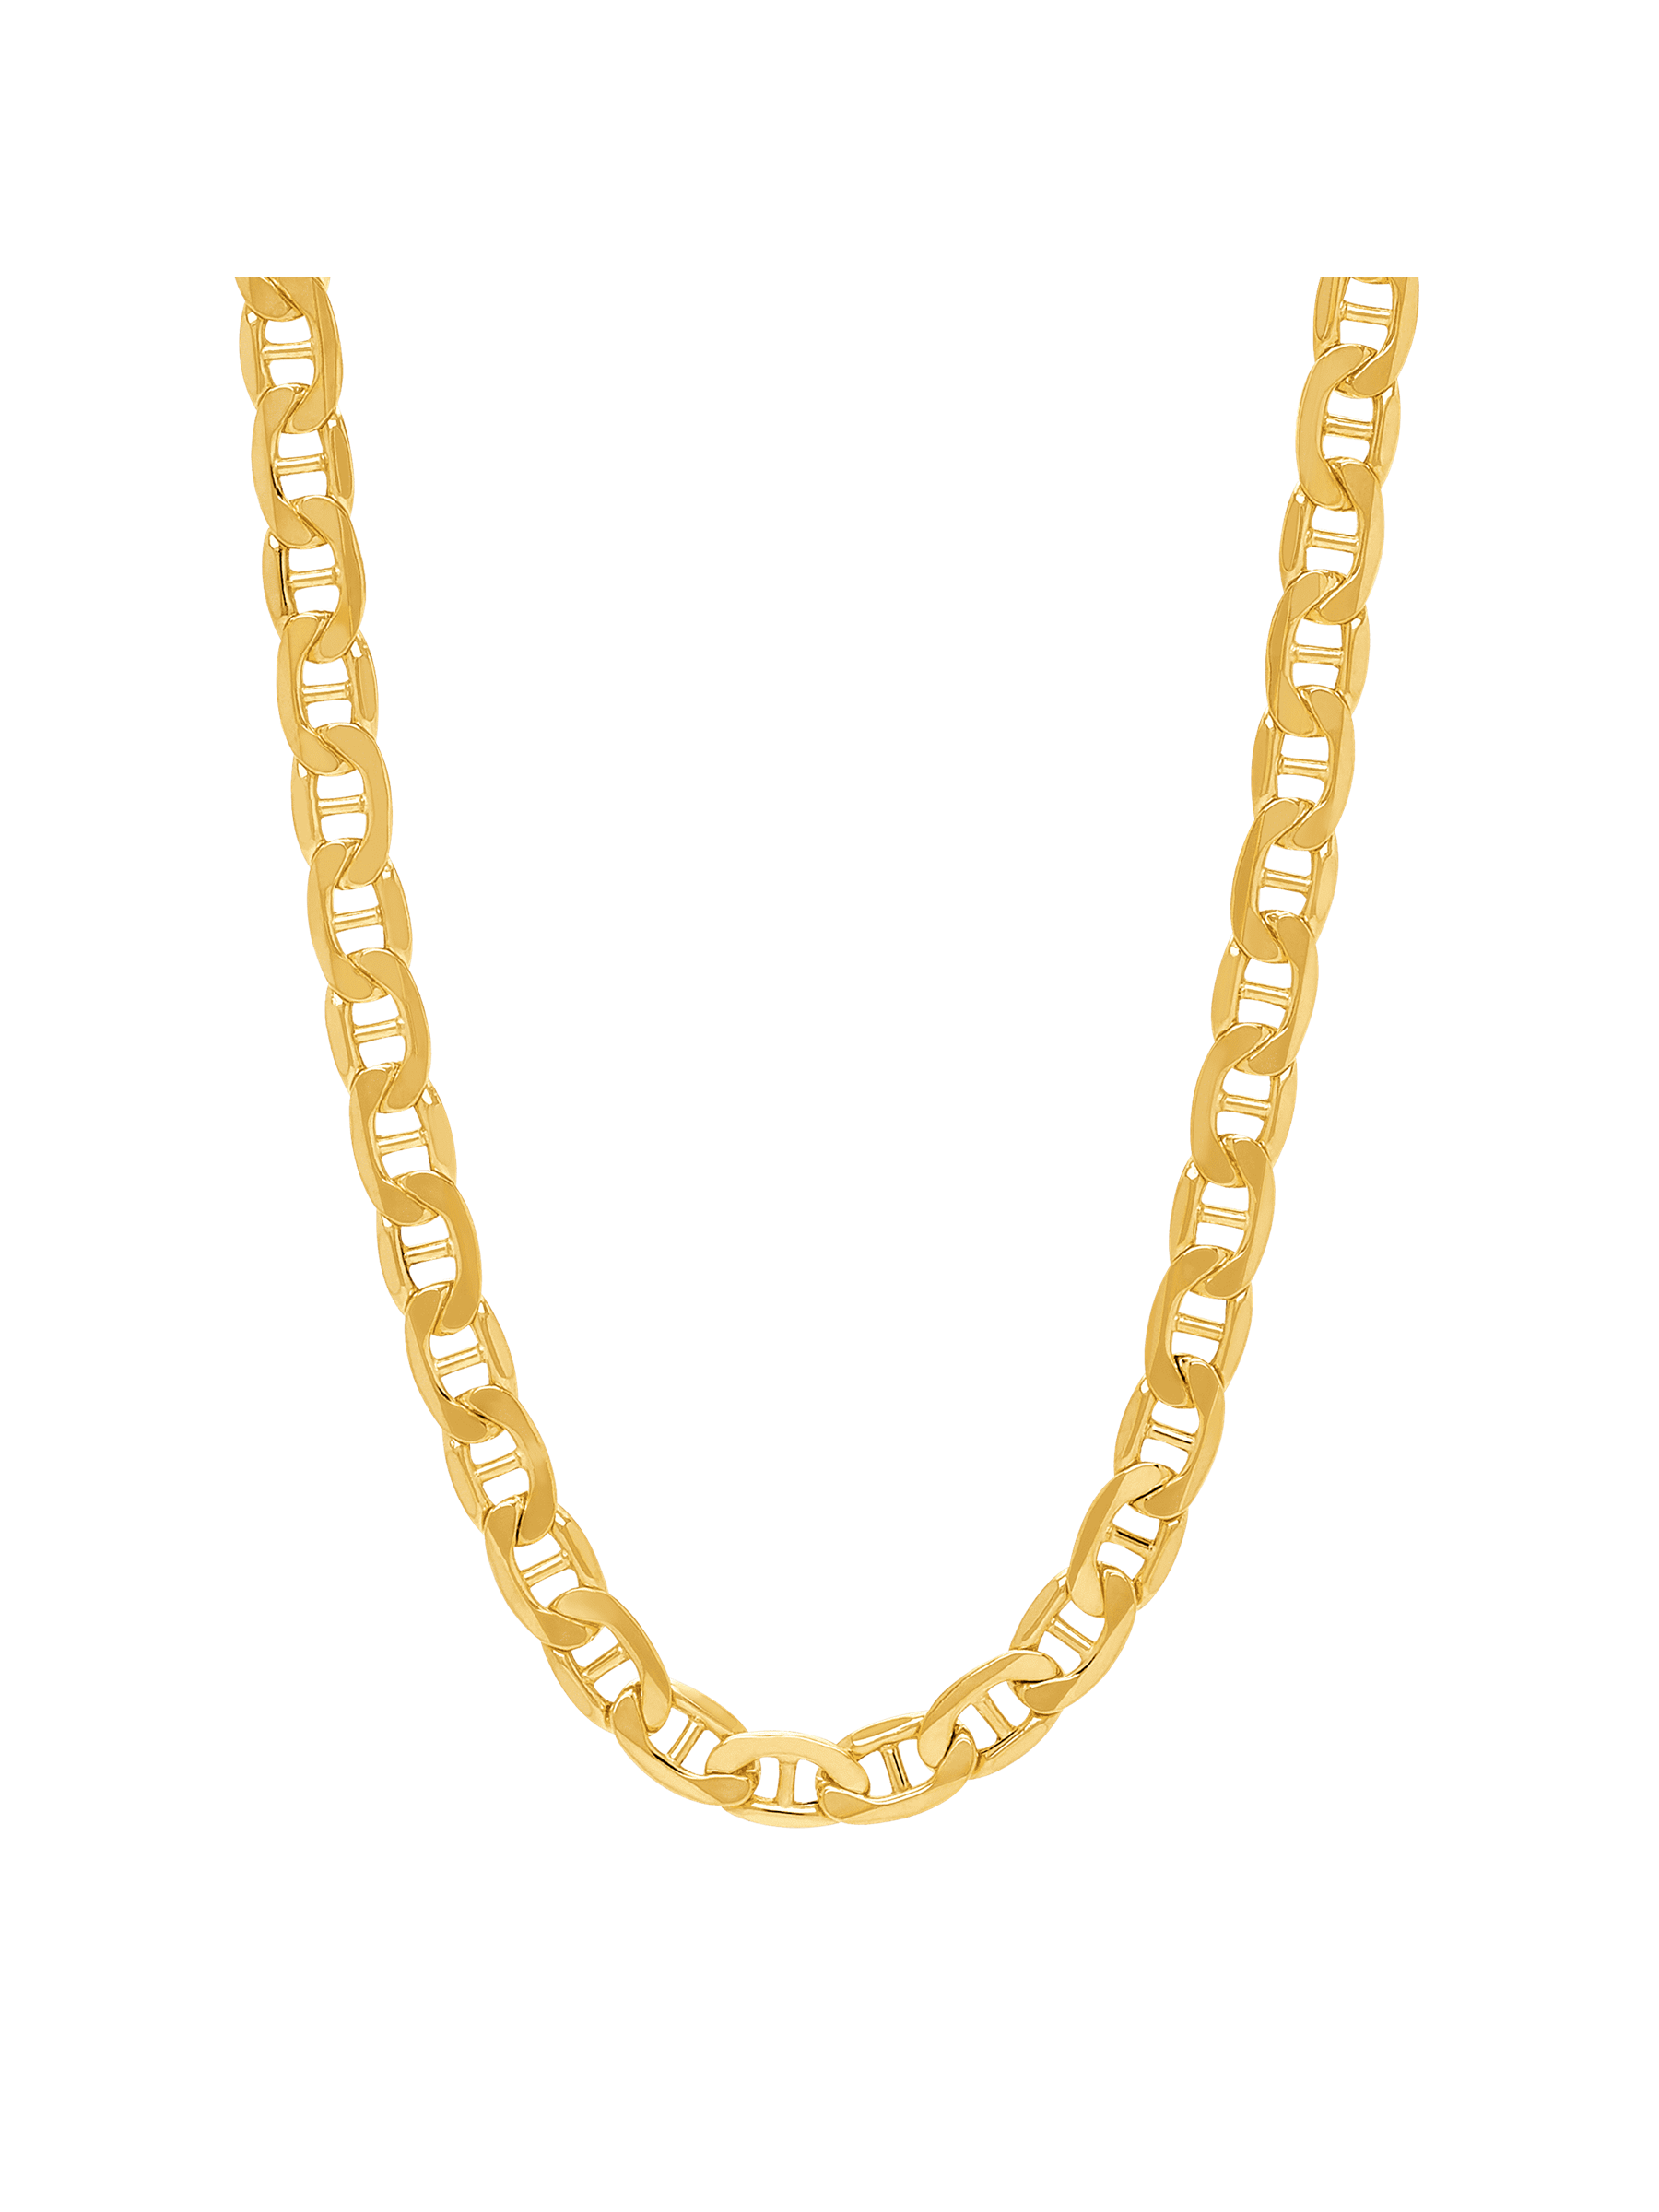 Welry Men's Italian-Made 7.2mm Beveled Mariner Link Chain Necklace in 10kt Yellow Gold, 22" - image 1 of 4